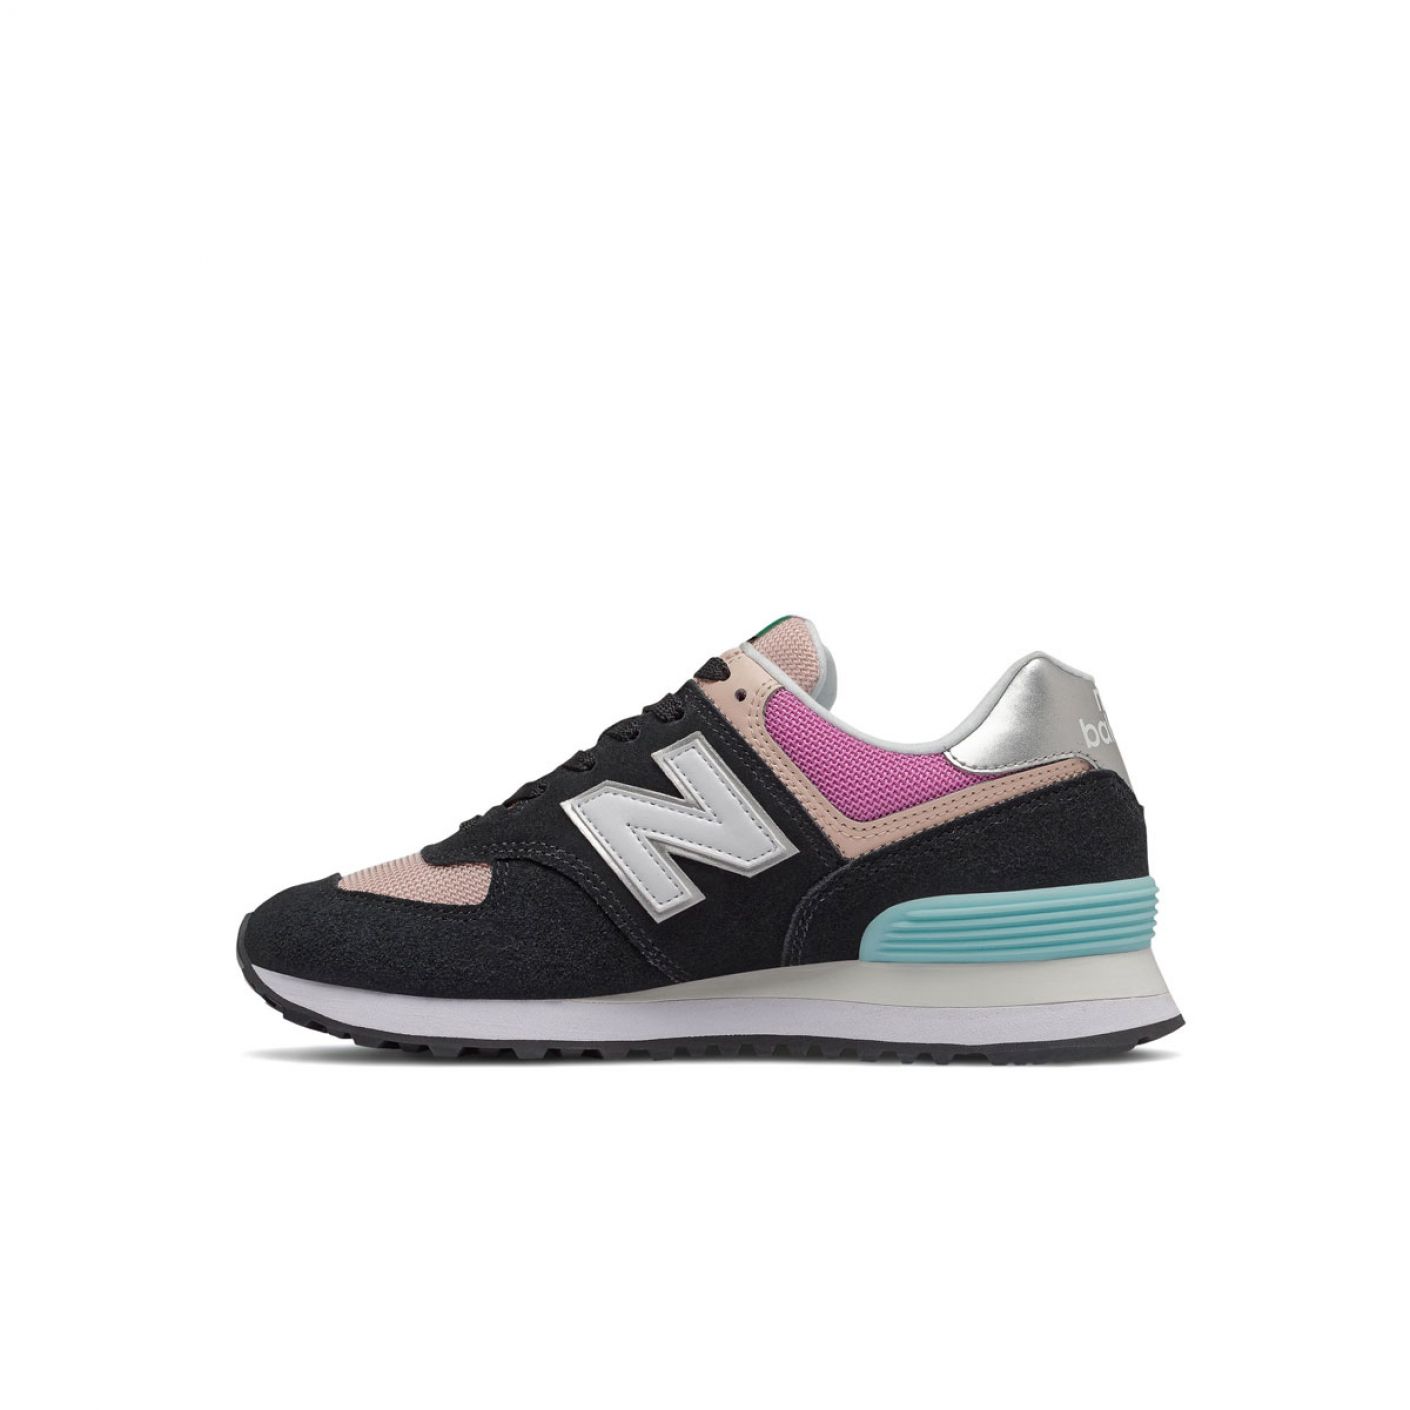 New Balance 574 Suede Black with Madder Rose for Women